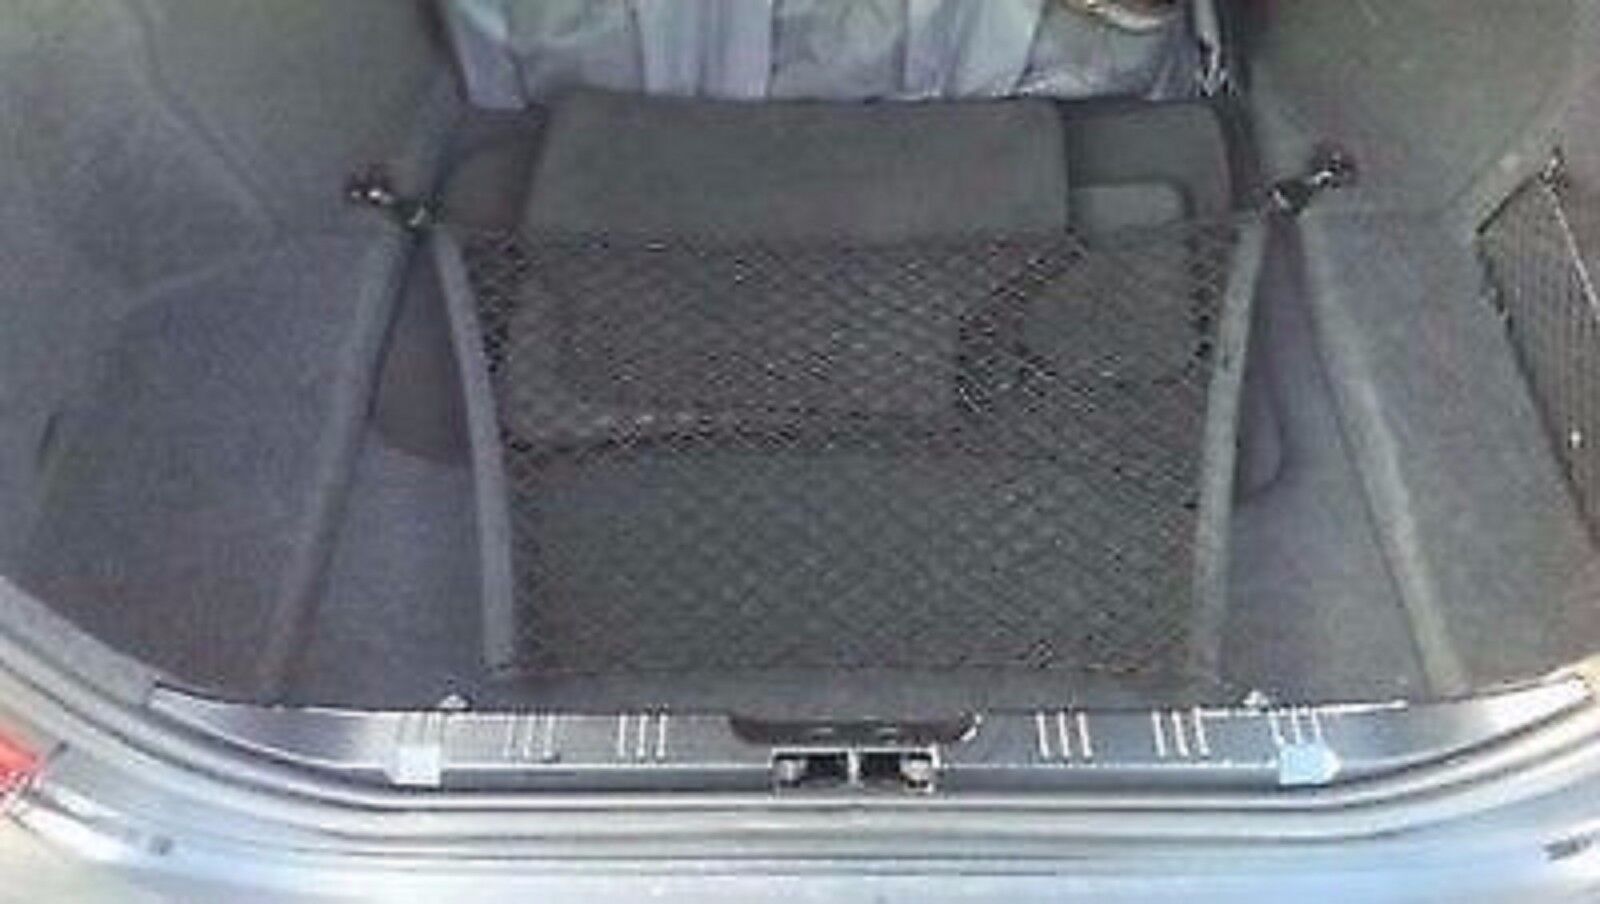 TRUNK FLOOR STYLE CARGO NET FOR BMW 3-SERIES 3 SERIES BRAND NEW